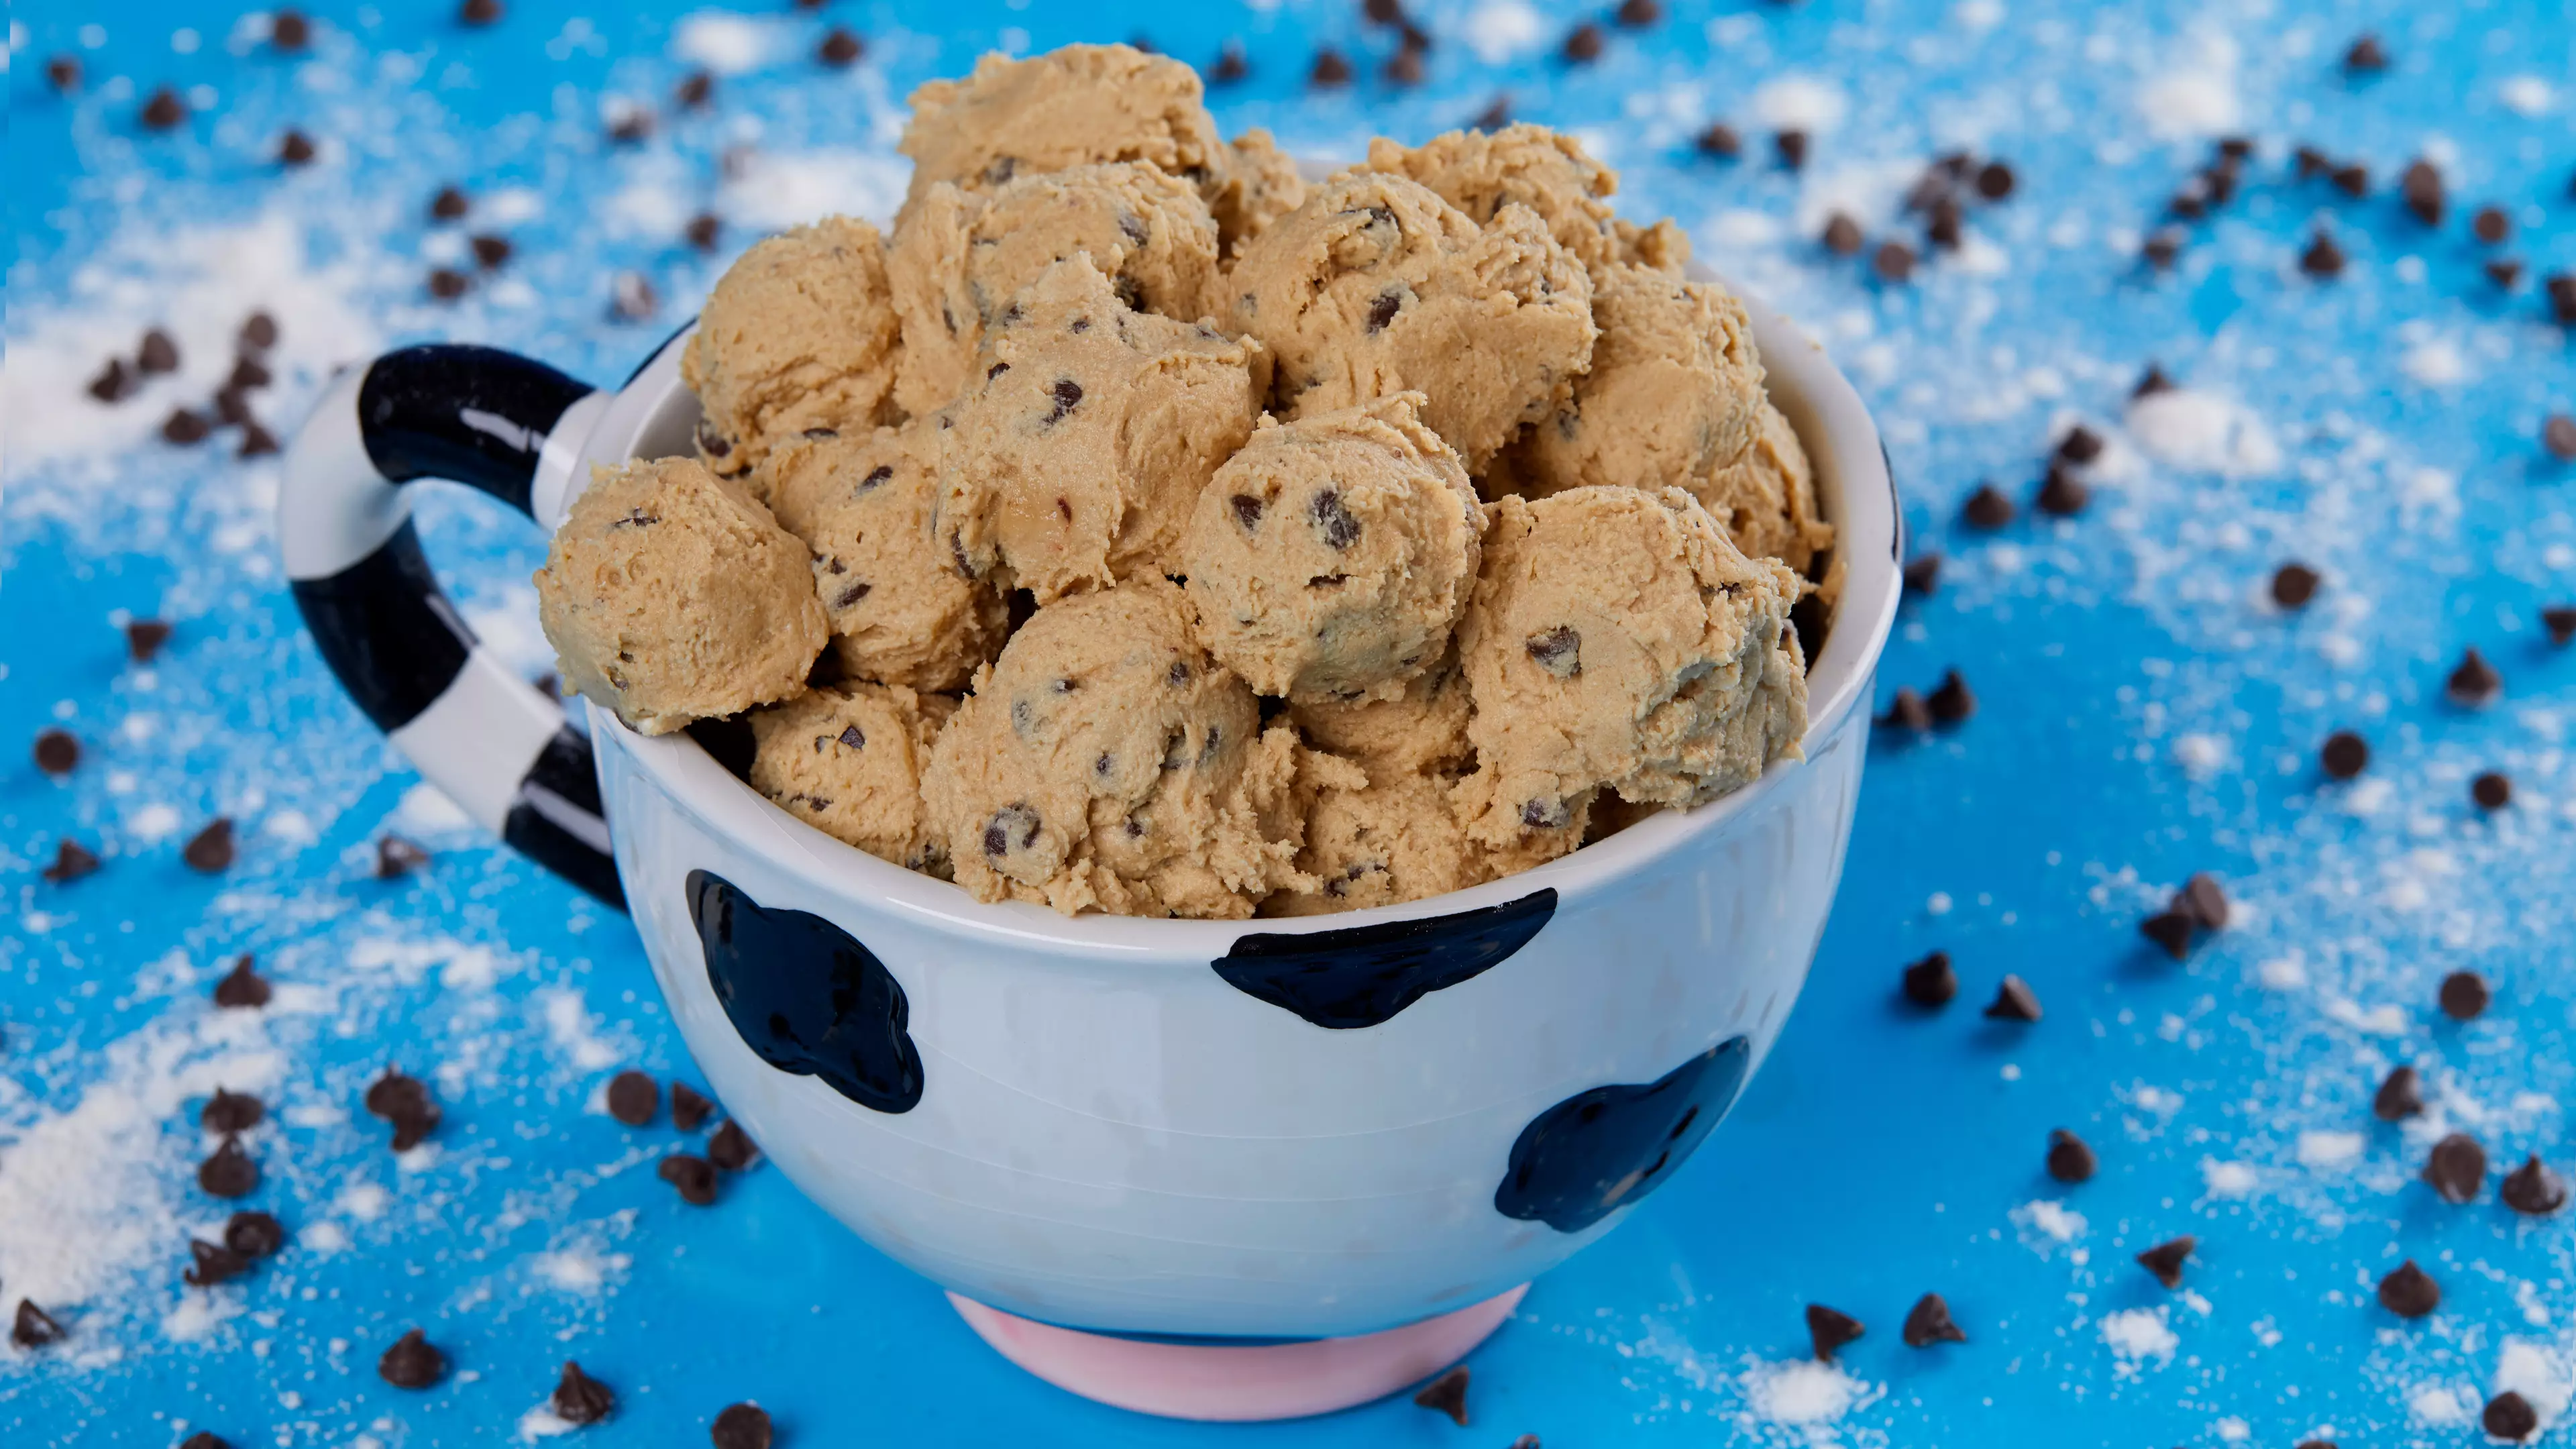 Ben & Jerry's Has Released Its Iconic Cookie Dough Recipe